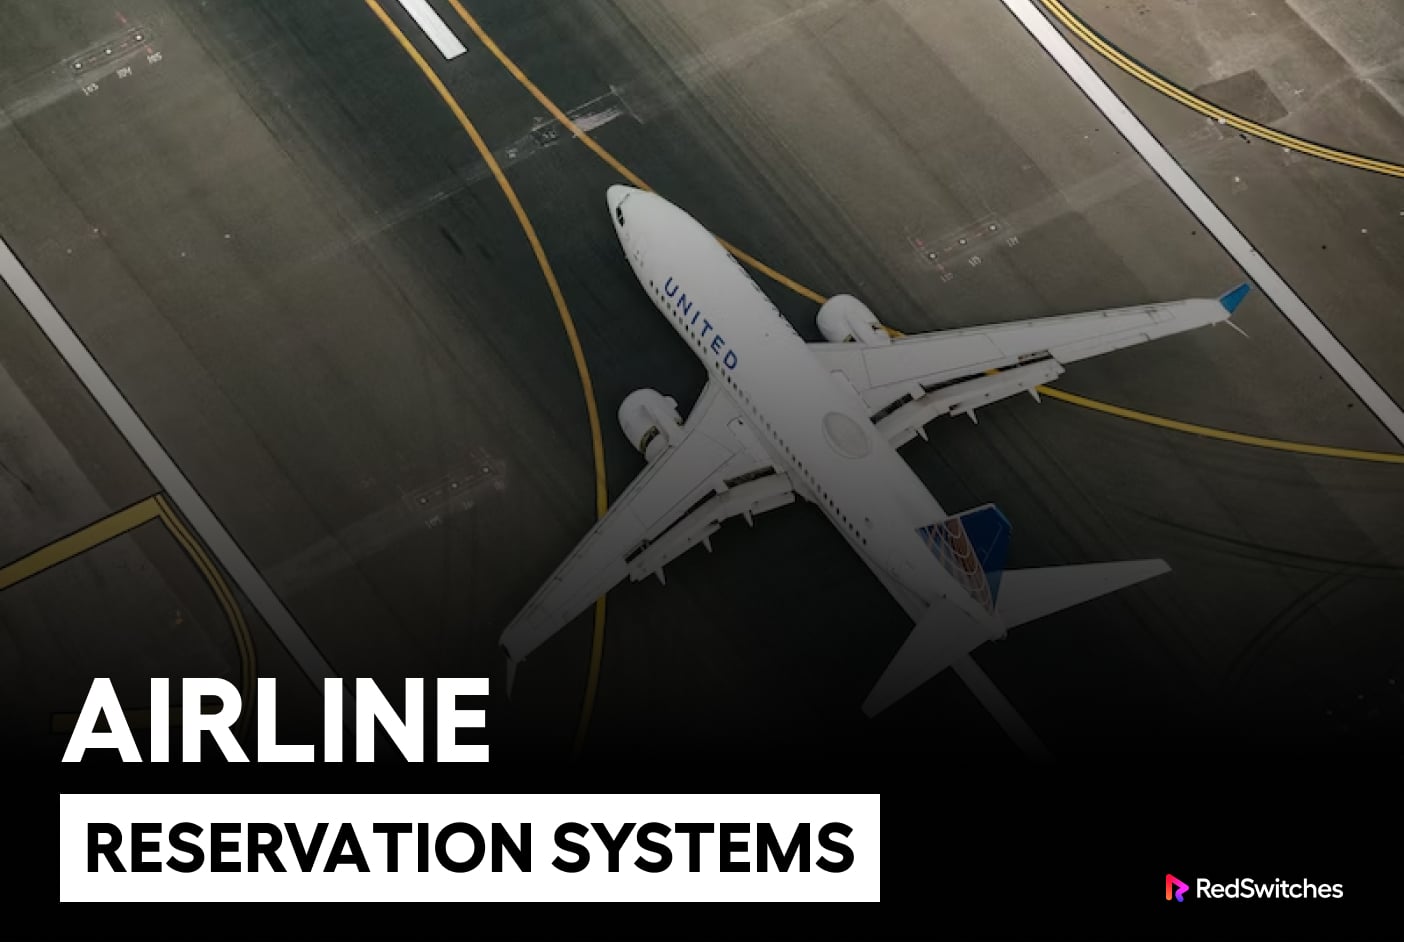 Airline reservation system is a examples of databases